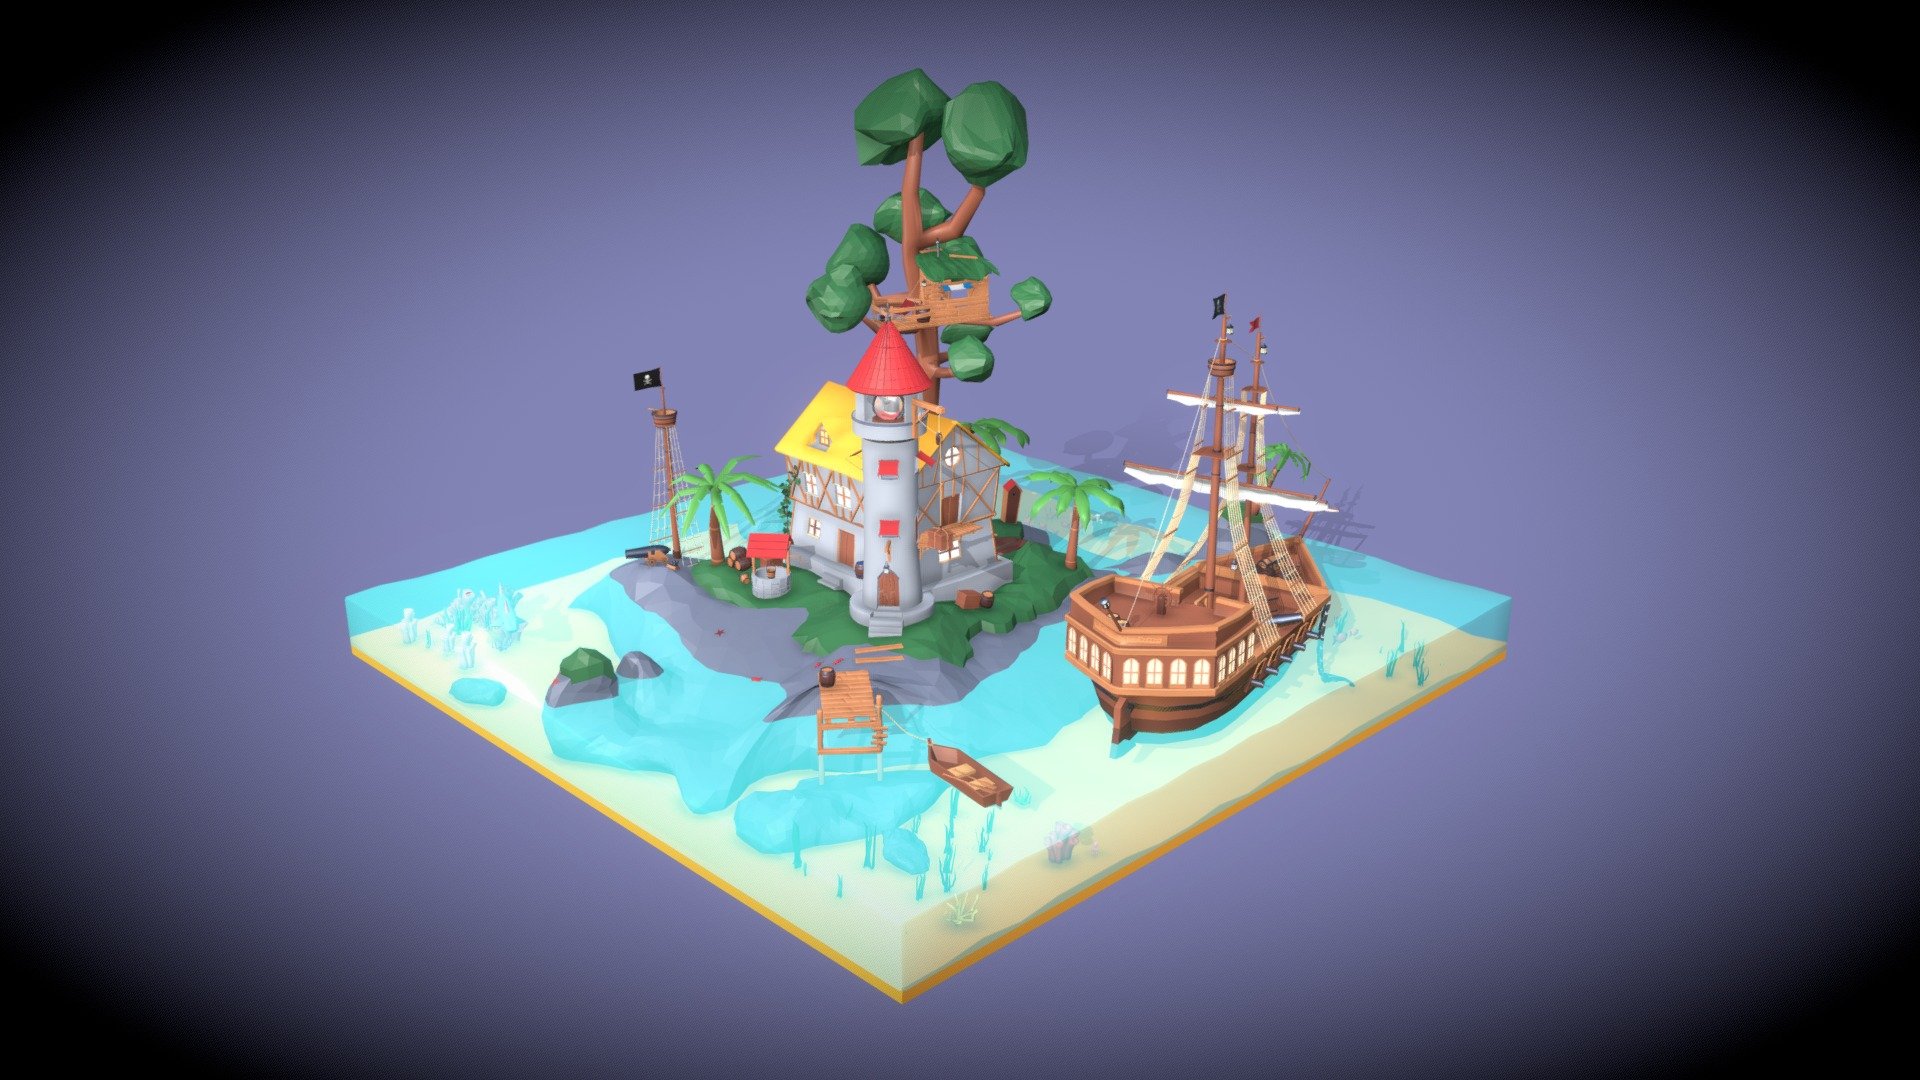 This is a fantasy pirate Island made with Blender 3d model